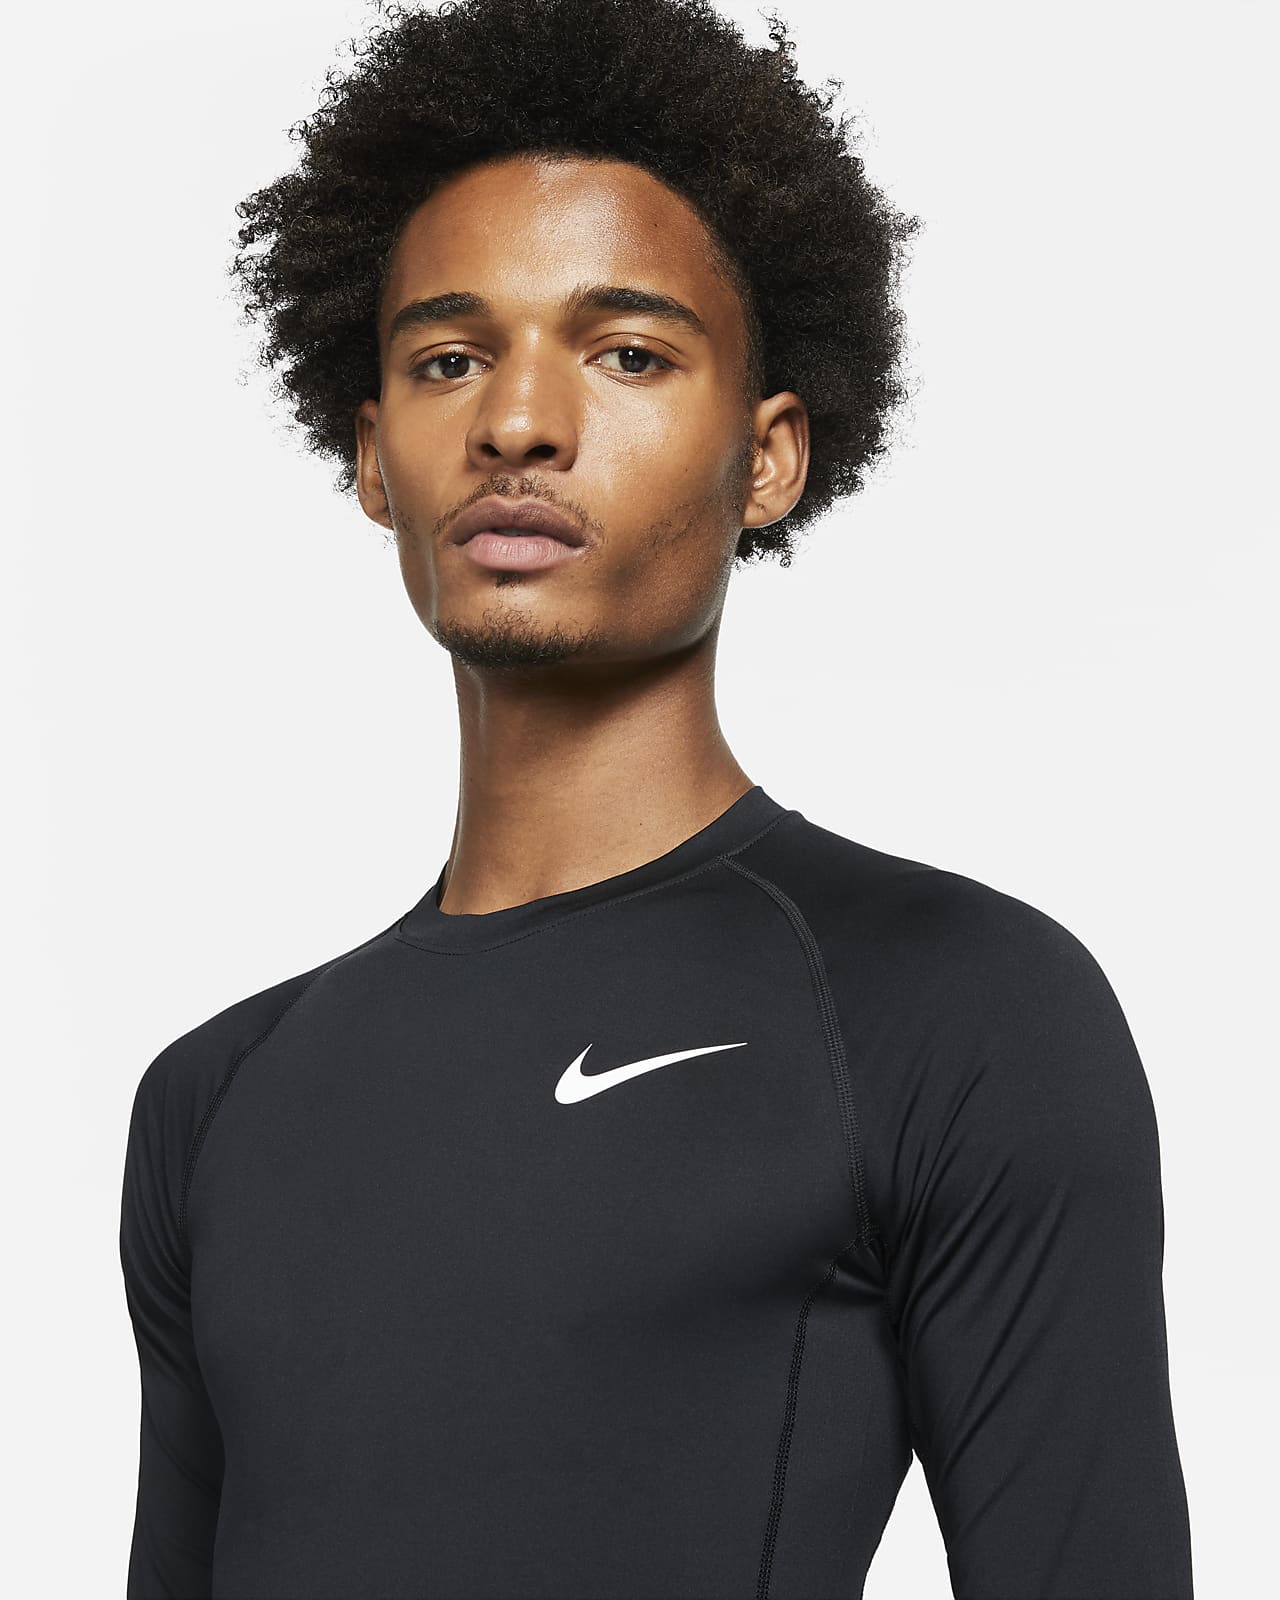 Men's Nike Pro Dri-fit Athleisure Casual Sports Round Neck Breathable Long  Sleeves Black T-Shirt DD1991-010